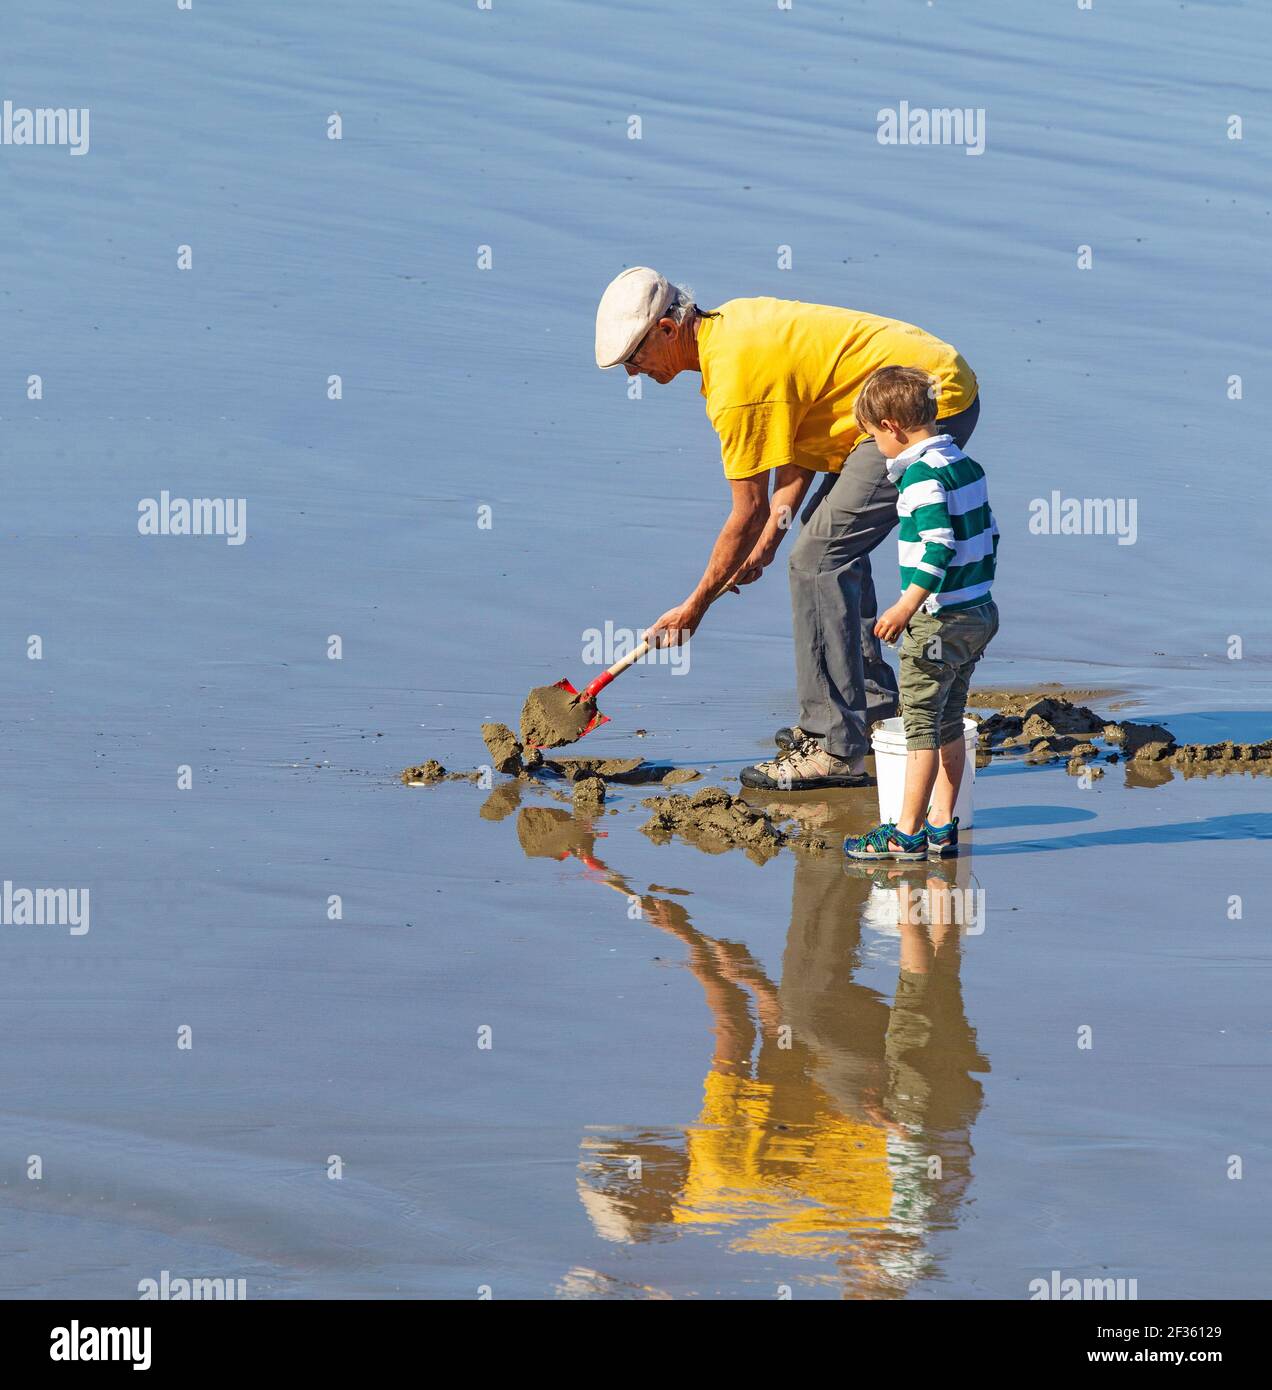 Young boy watching grandfather clamming Stock Photo